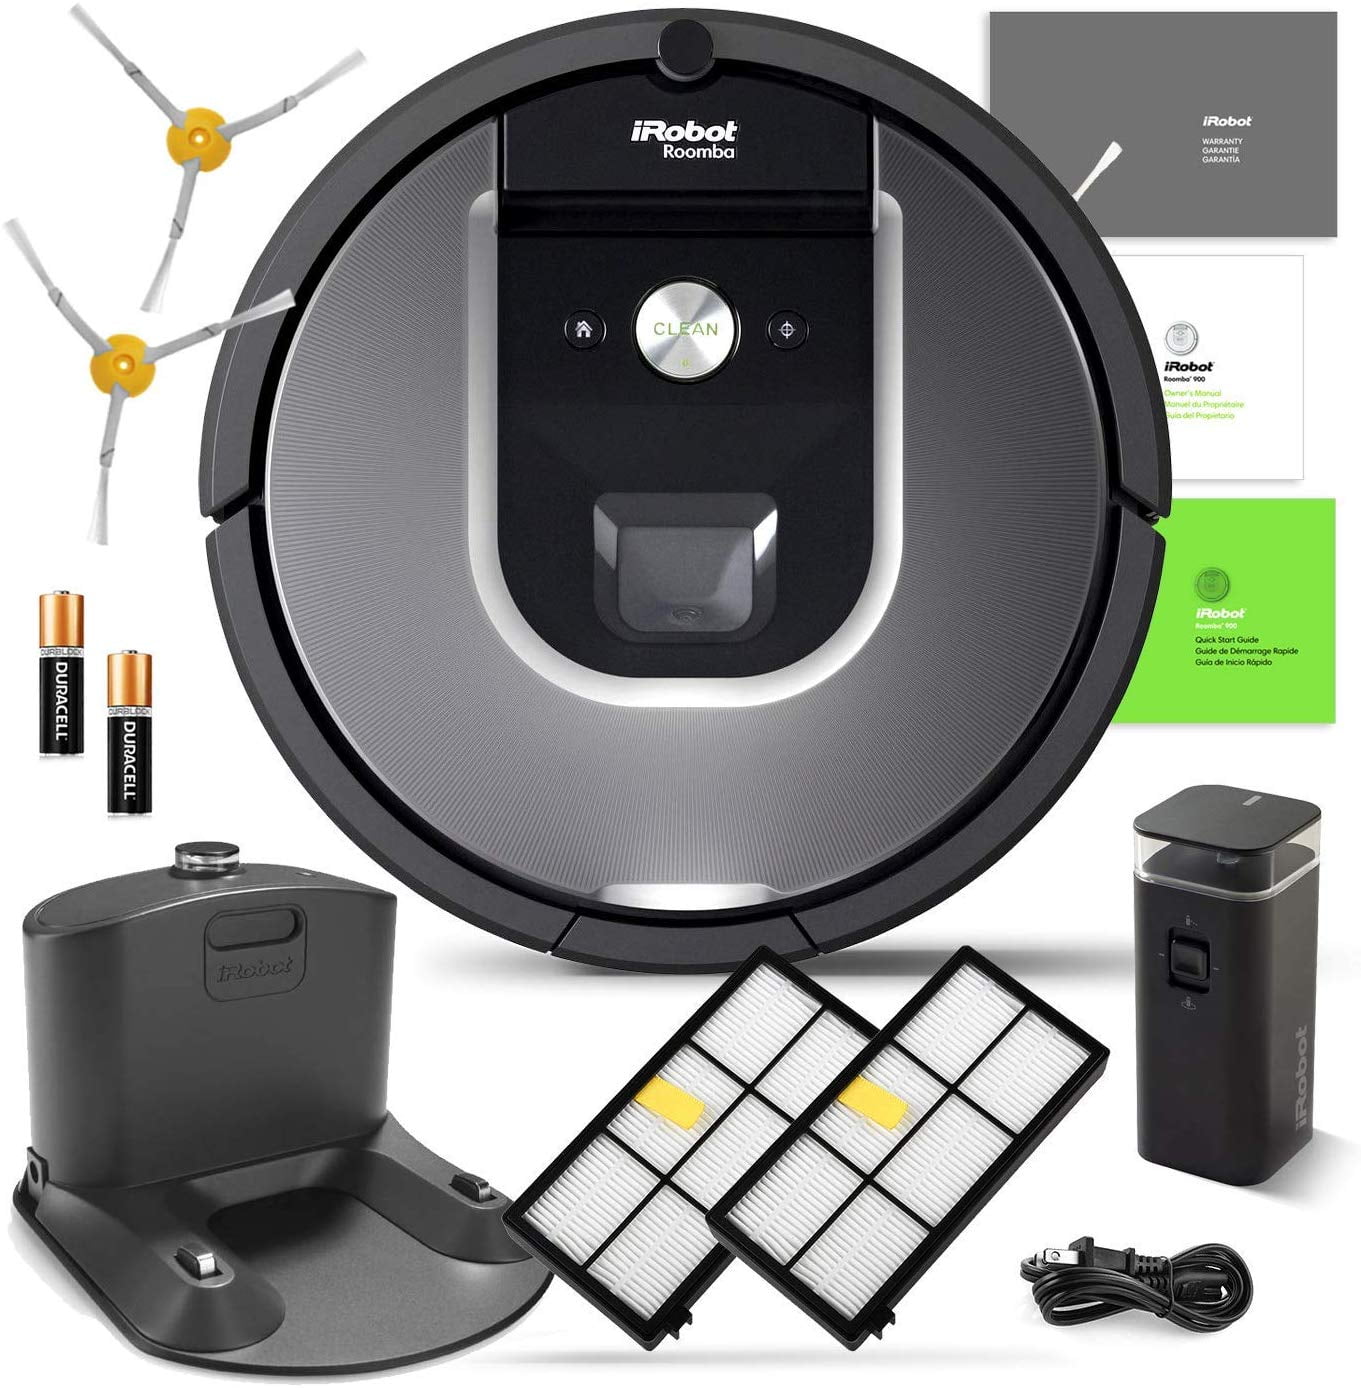 præsentation Voksen elektropositive Used iRobot Roomba 960 Robot Vacuum with Wi-Fi Connectivity, Compatible  with Alexa, Ideal for Pet Hair, Carpets, Hard Floors - Walmart.com